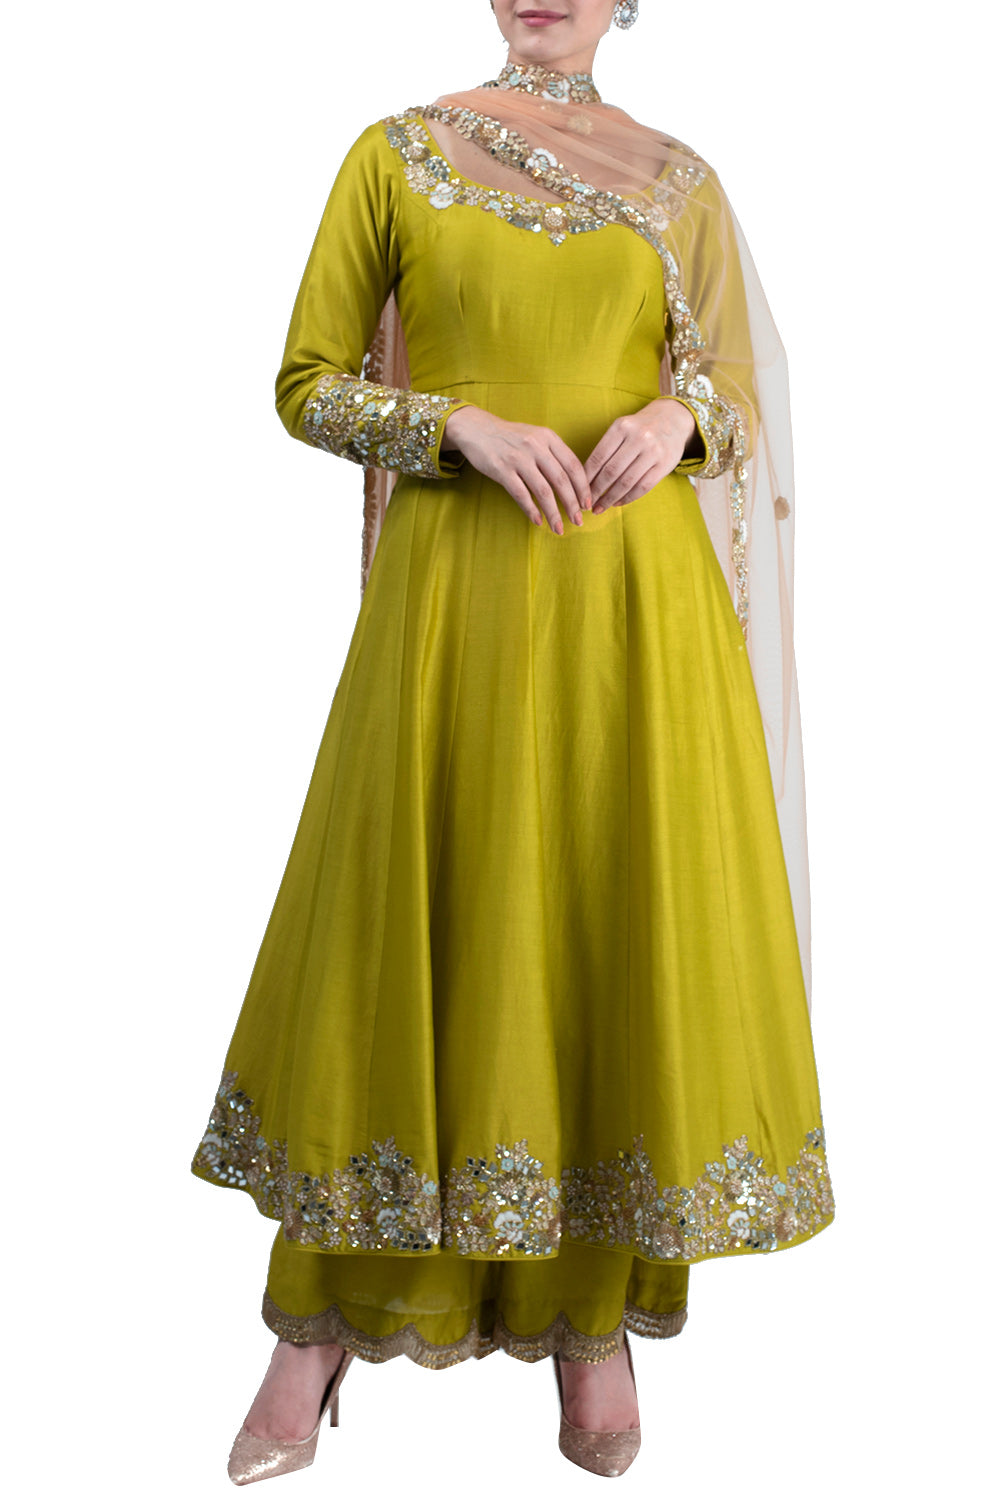 Ochre yellow hand embroidered anarkali suit - kylee